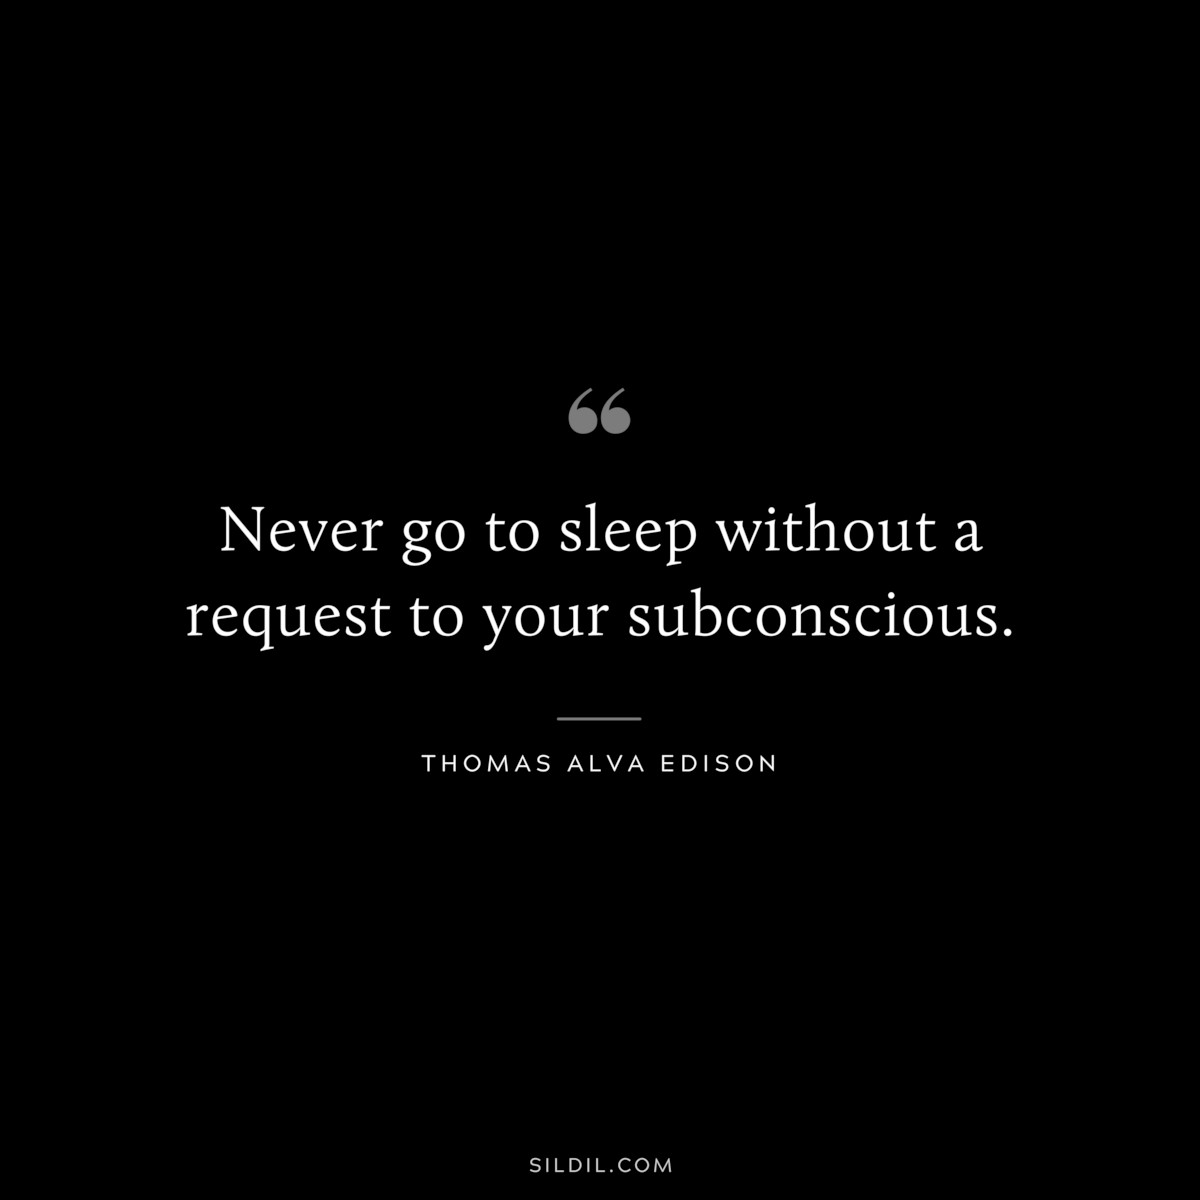 Never go to sleep without a request to your subconscious. ― Thomas Alva Edison